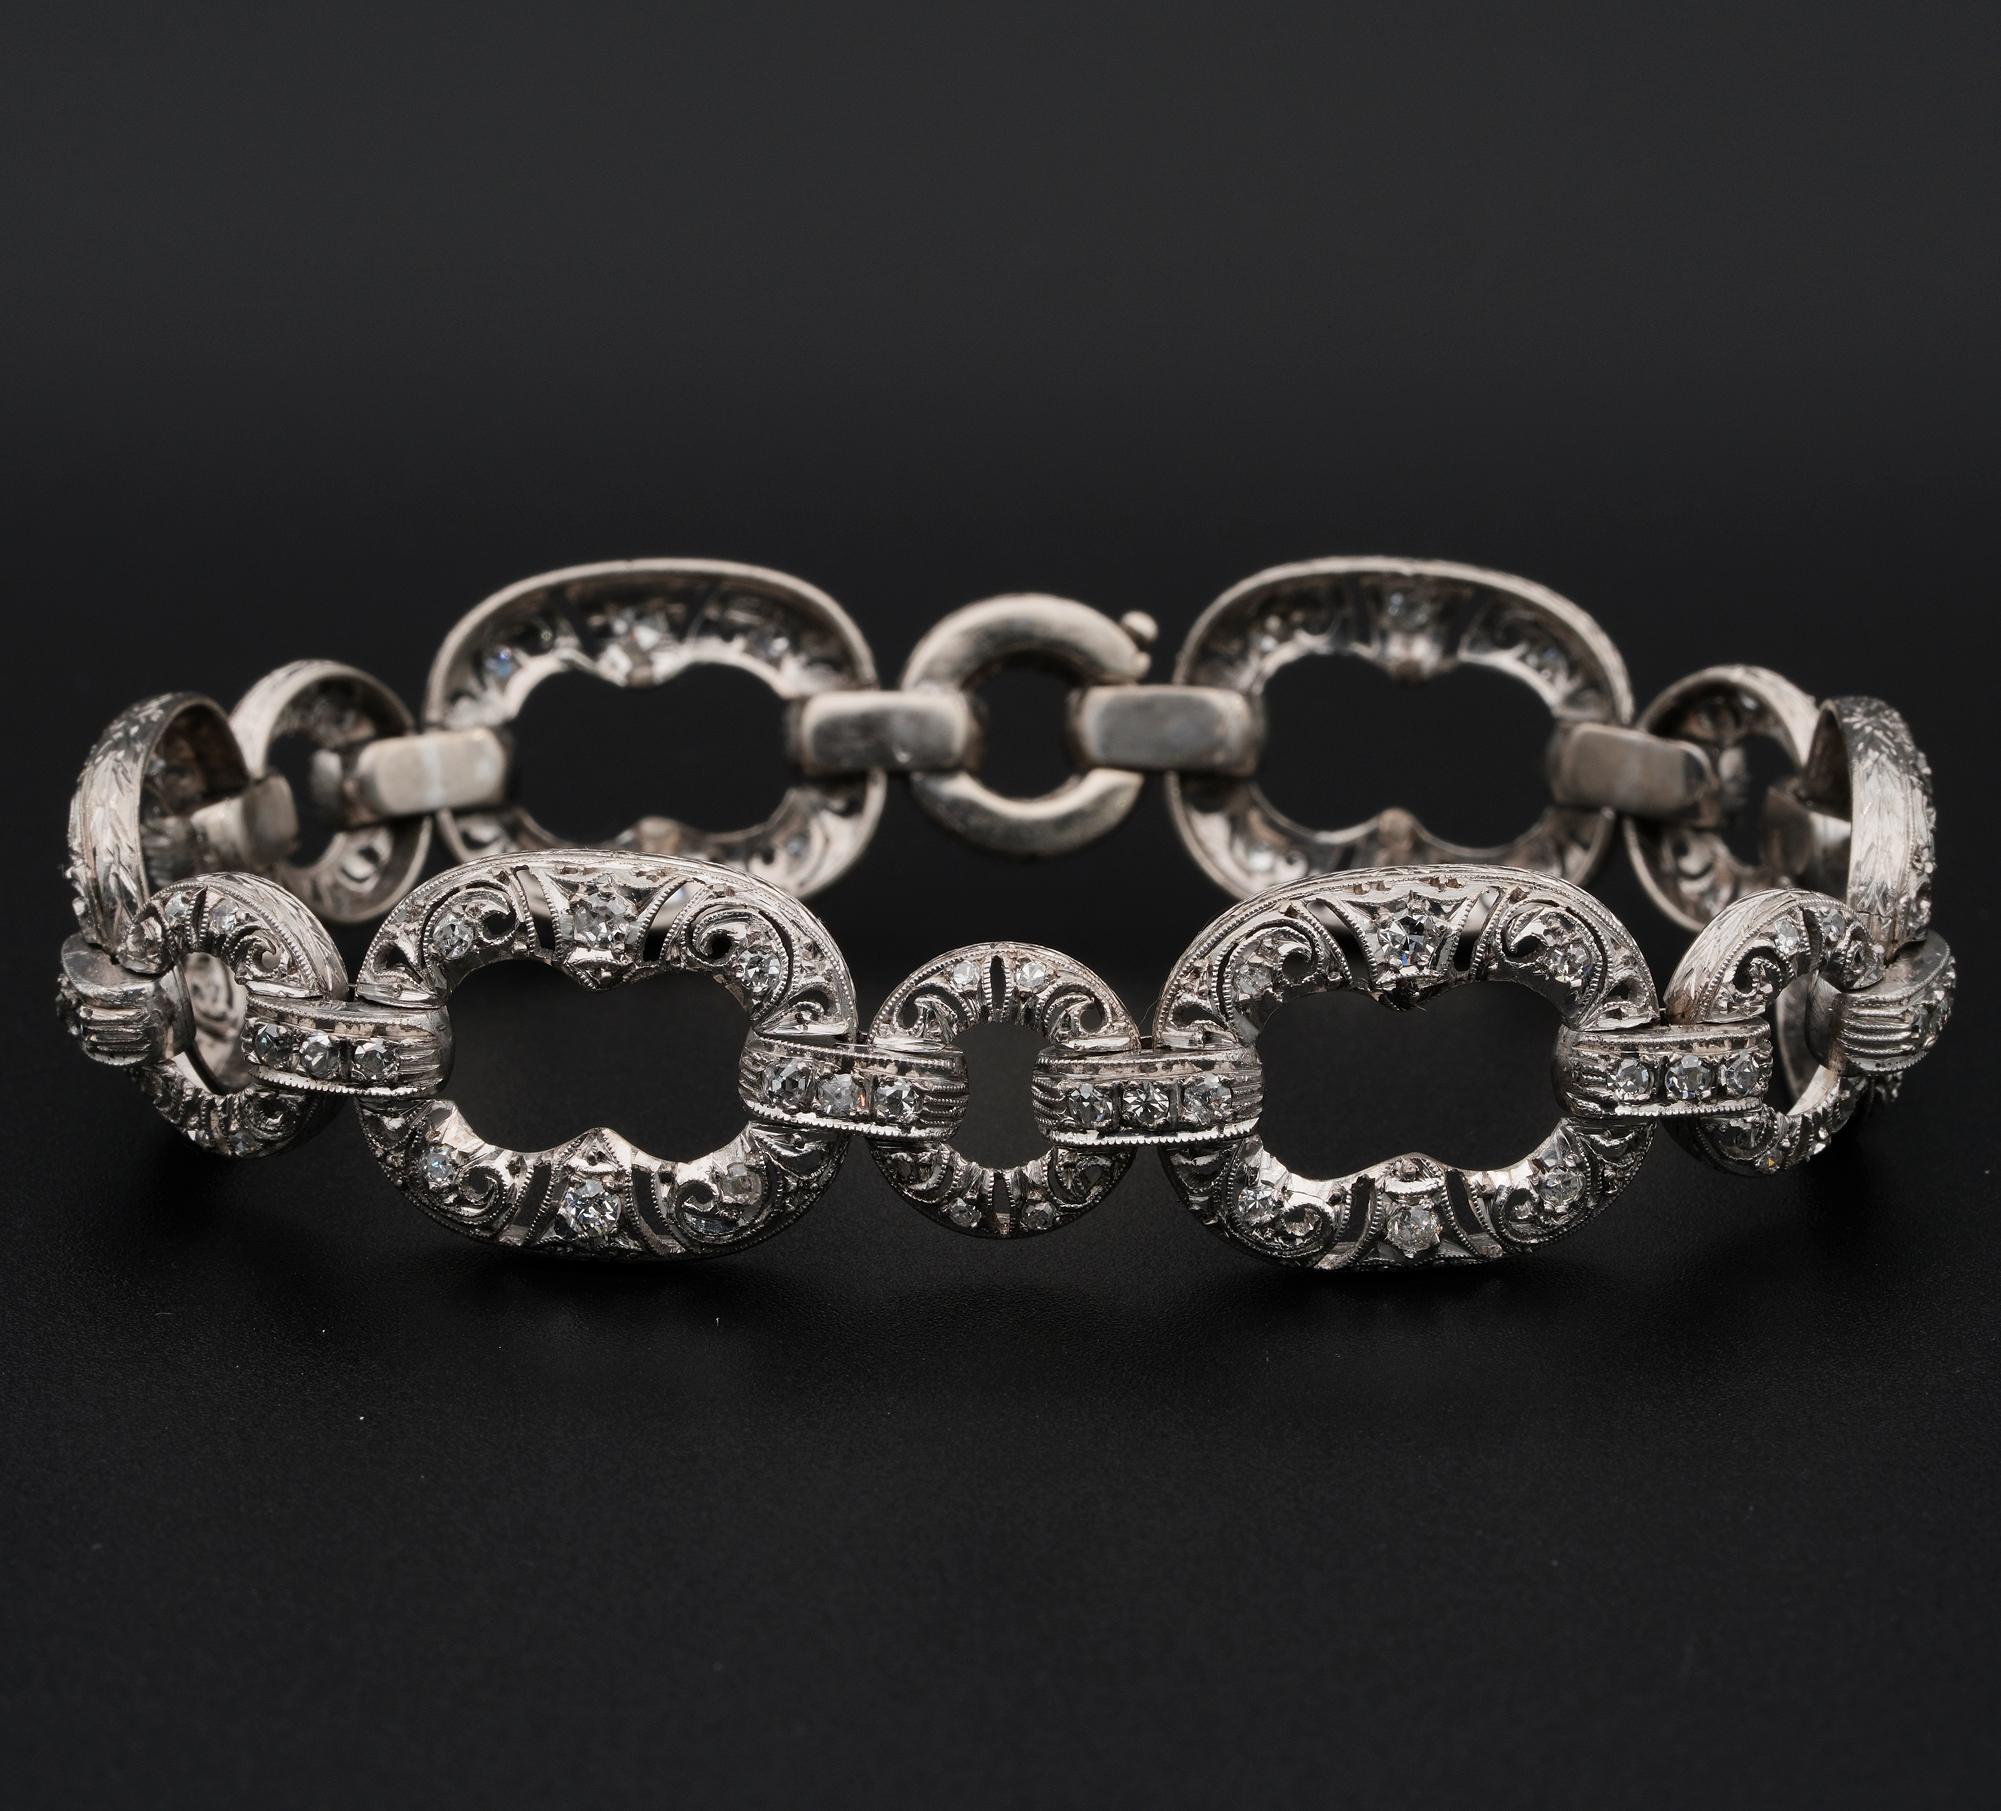 Roaring 20’s
Absolute Beauty this one off bracelet original from the roaring 20’s
Art Deco pure expression here for the extraordinary craftsmanship produced in combination to a very tasty design
This wonderful easy wear bracelet is made of all